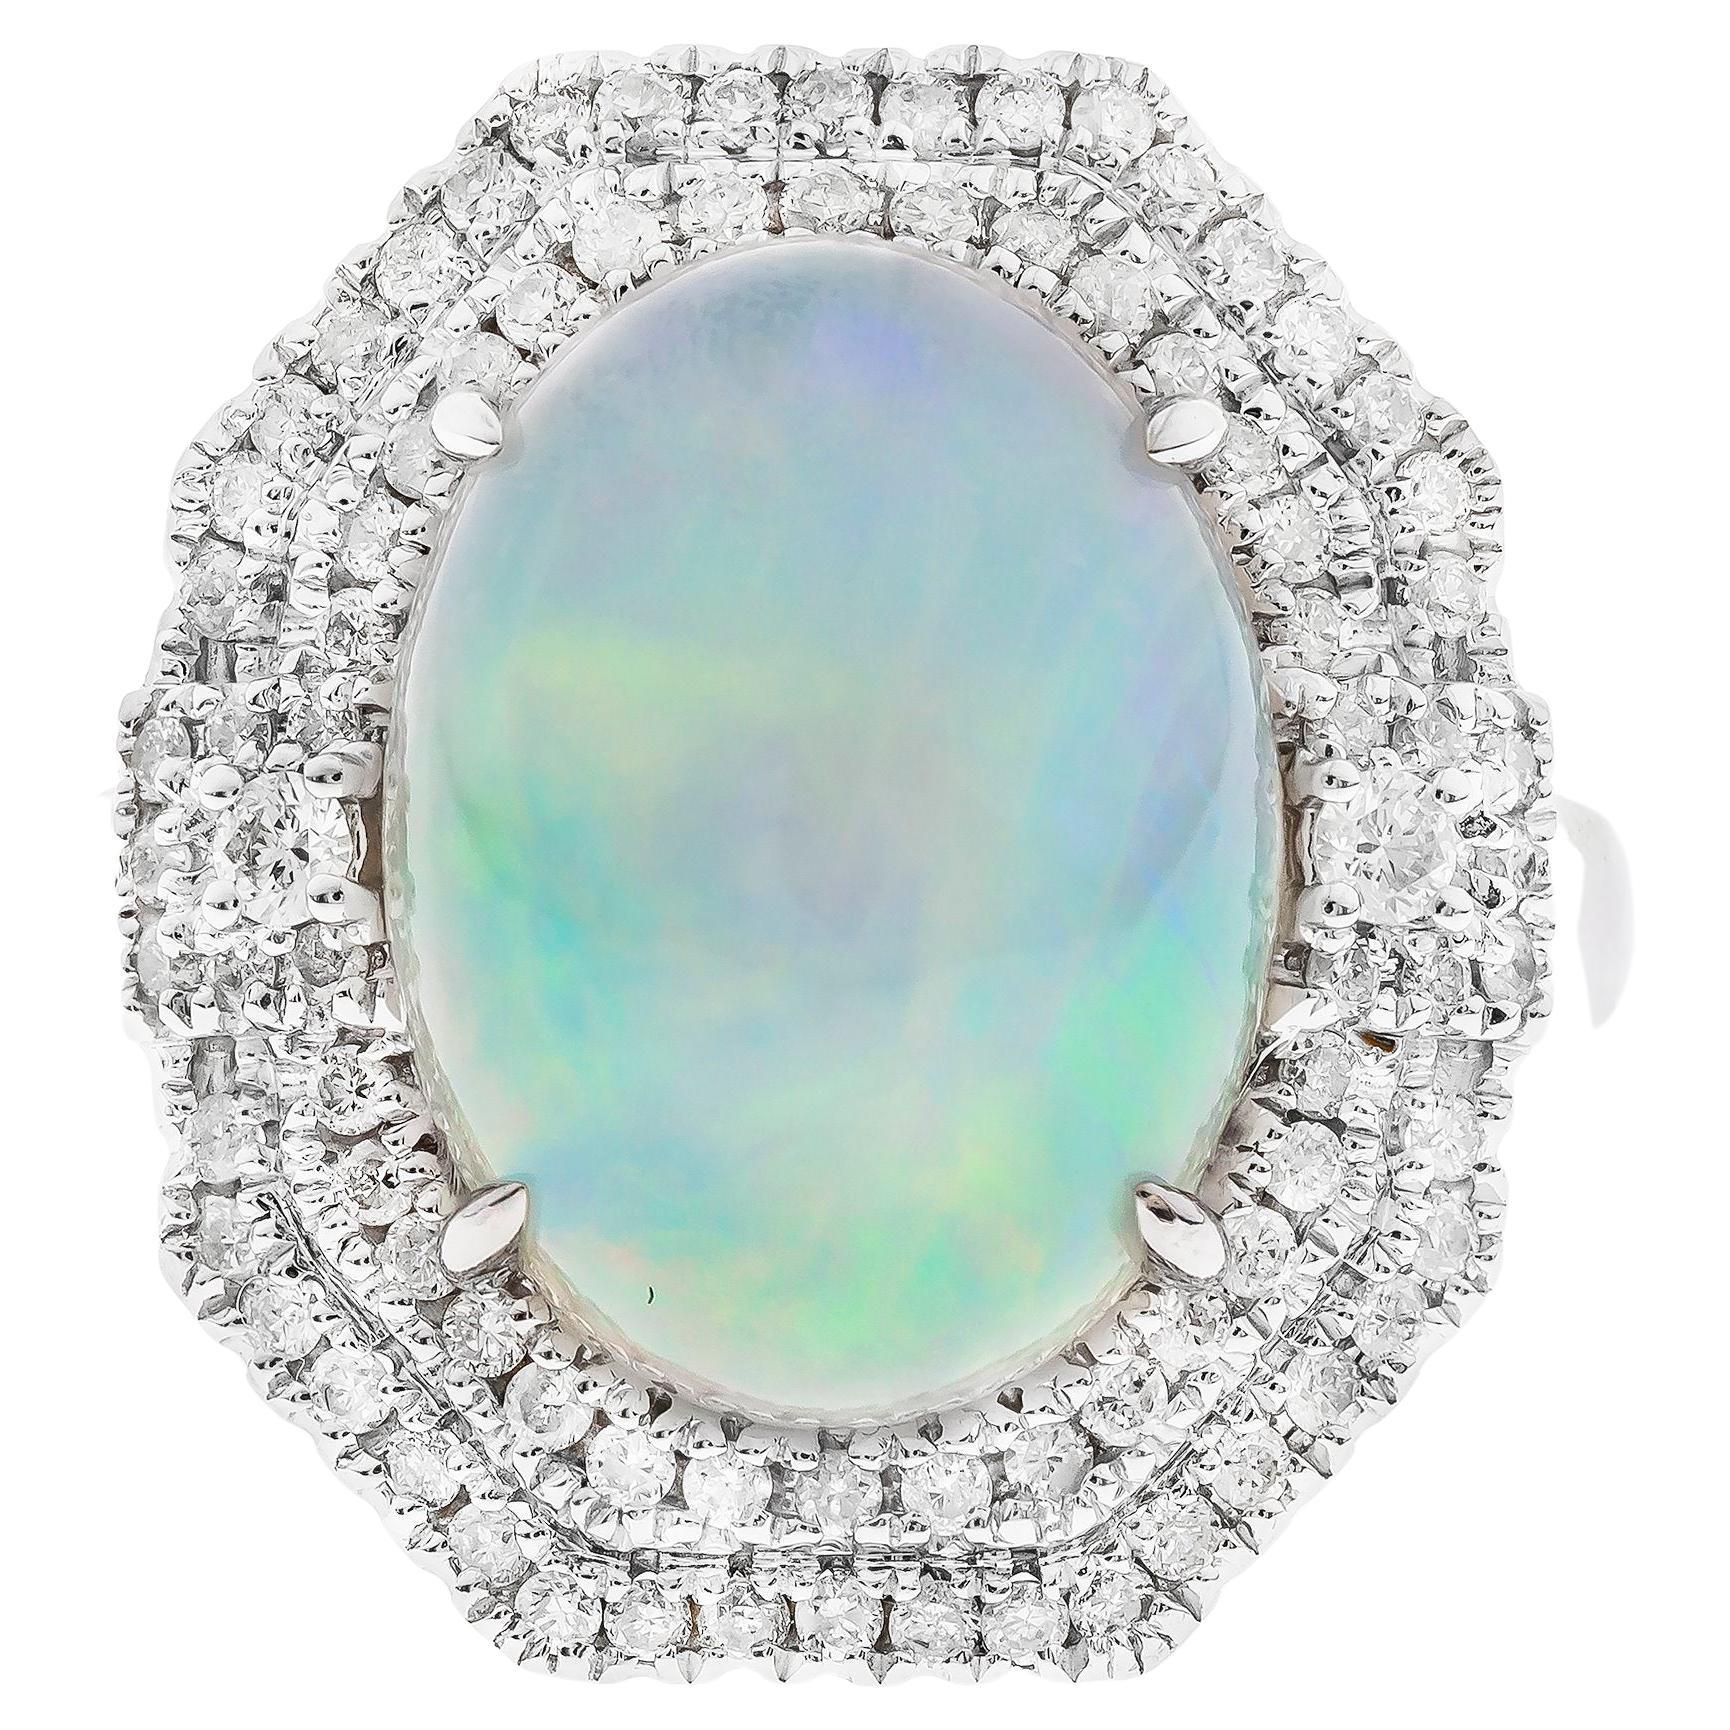 7.52 Carat Oval Cab Ethiopian Opal Diamond Accents 14K White Gold Ring